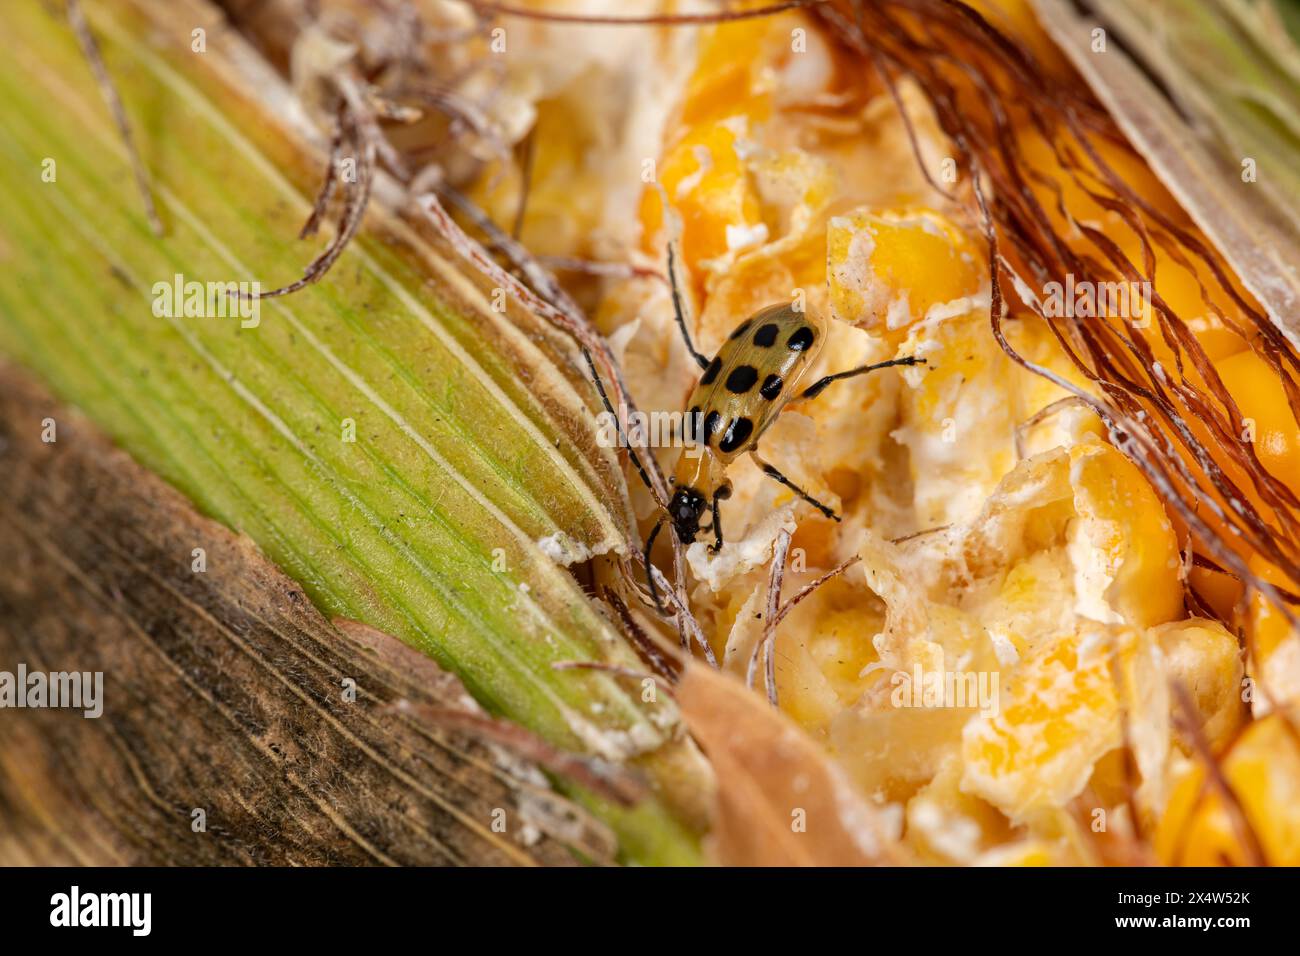 Southern Corn Rootworm beetle eating kernels on ear of corn. Agriculture pest control, insect damage and farming insecticide concept. Stock Photo